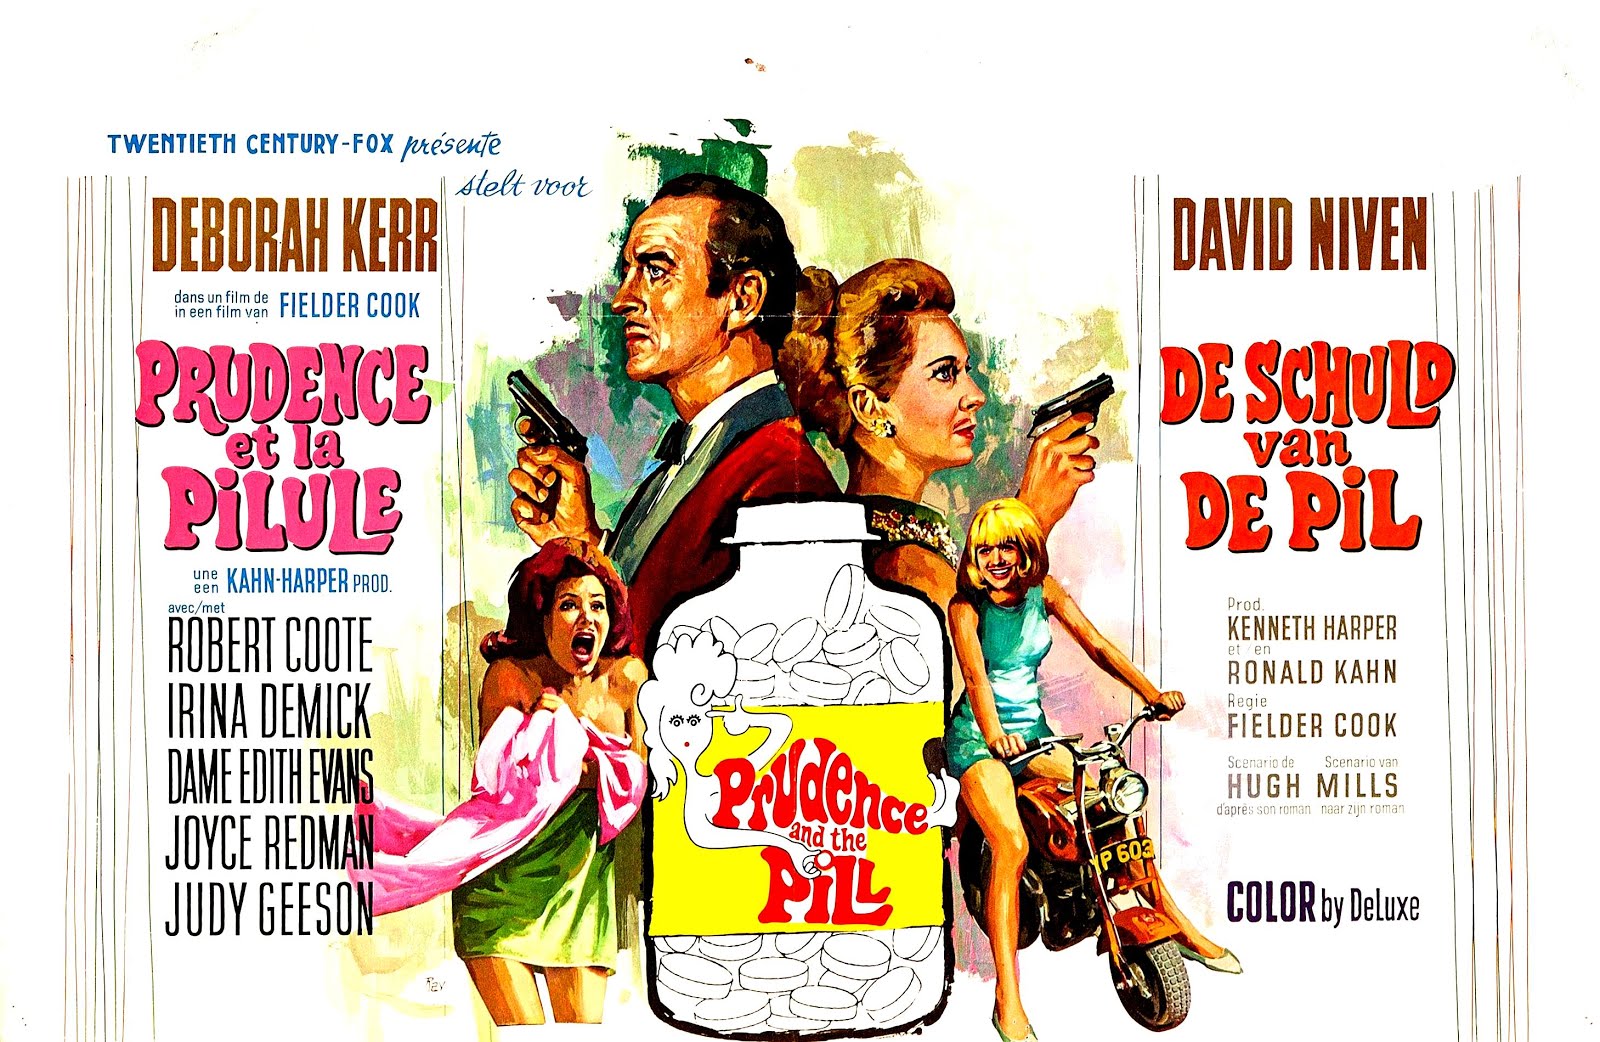 Prudence... Et la pilule (1967) Fielder Cook / Ronald Neame - Prudence and the pill